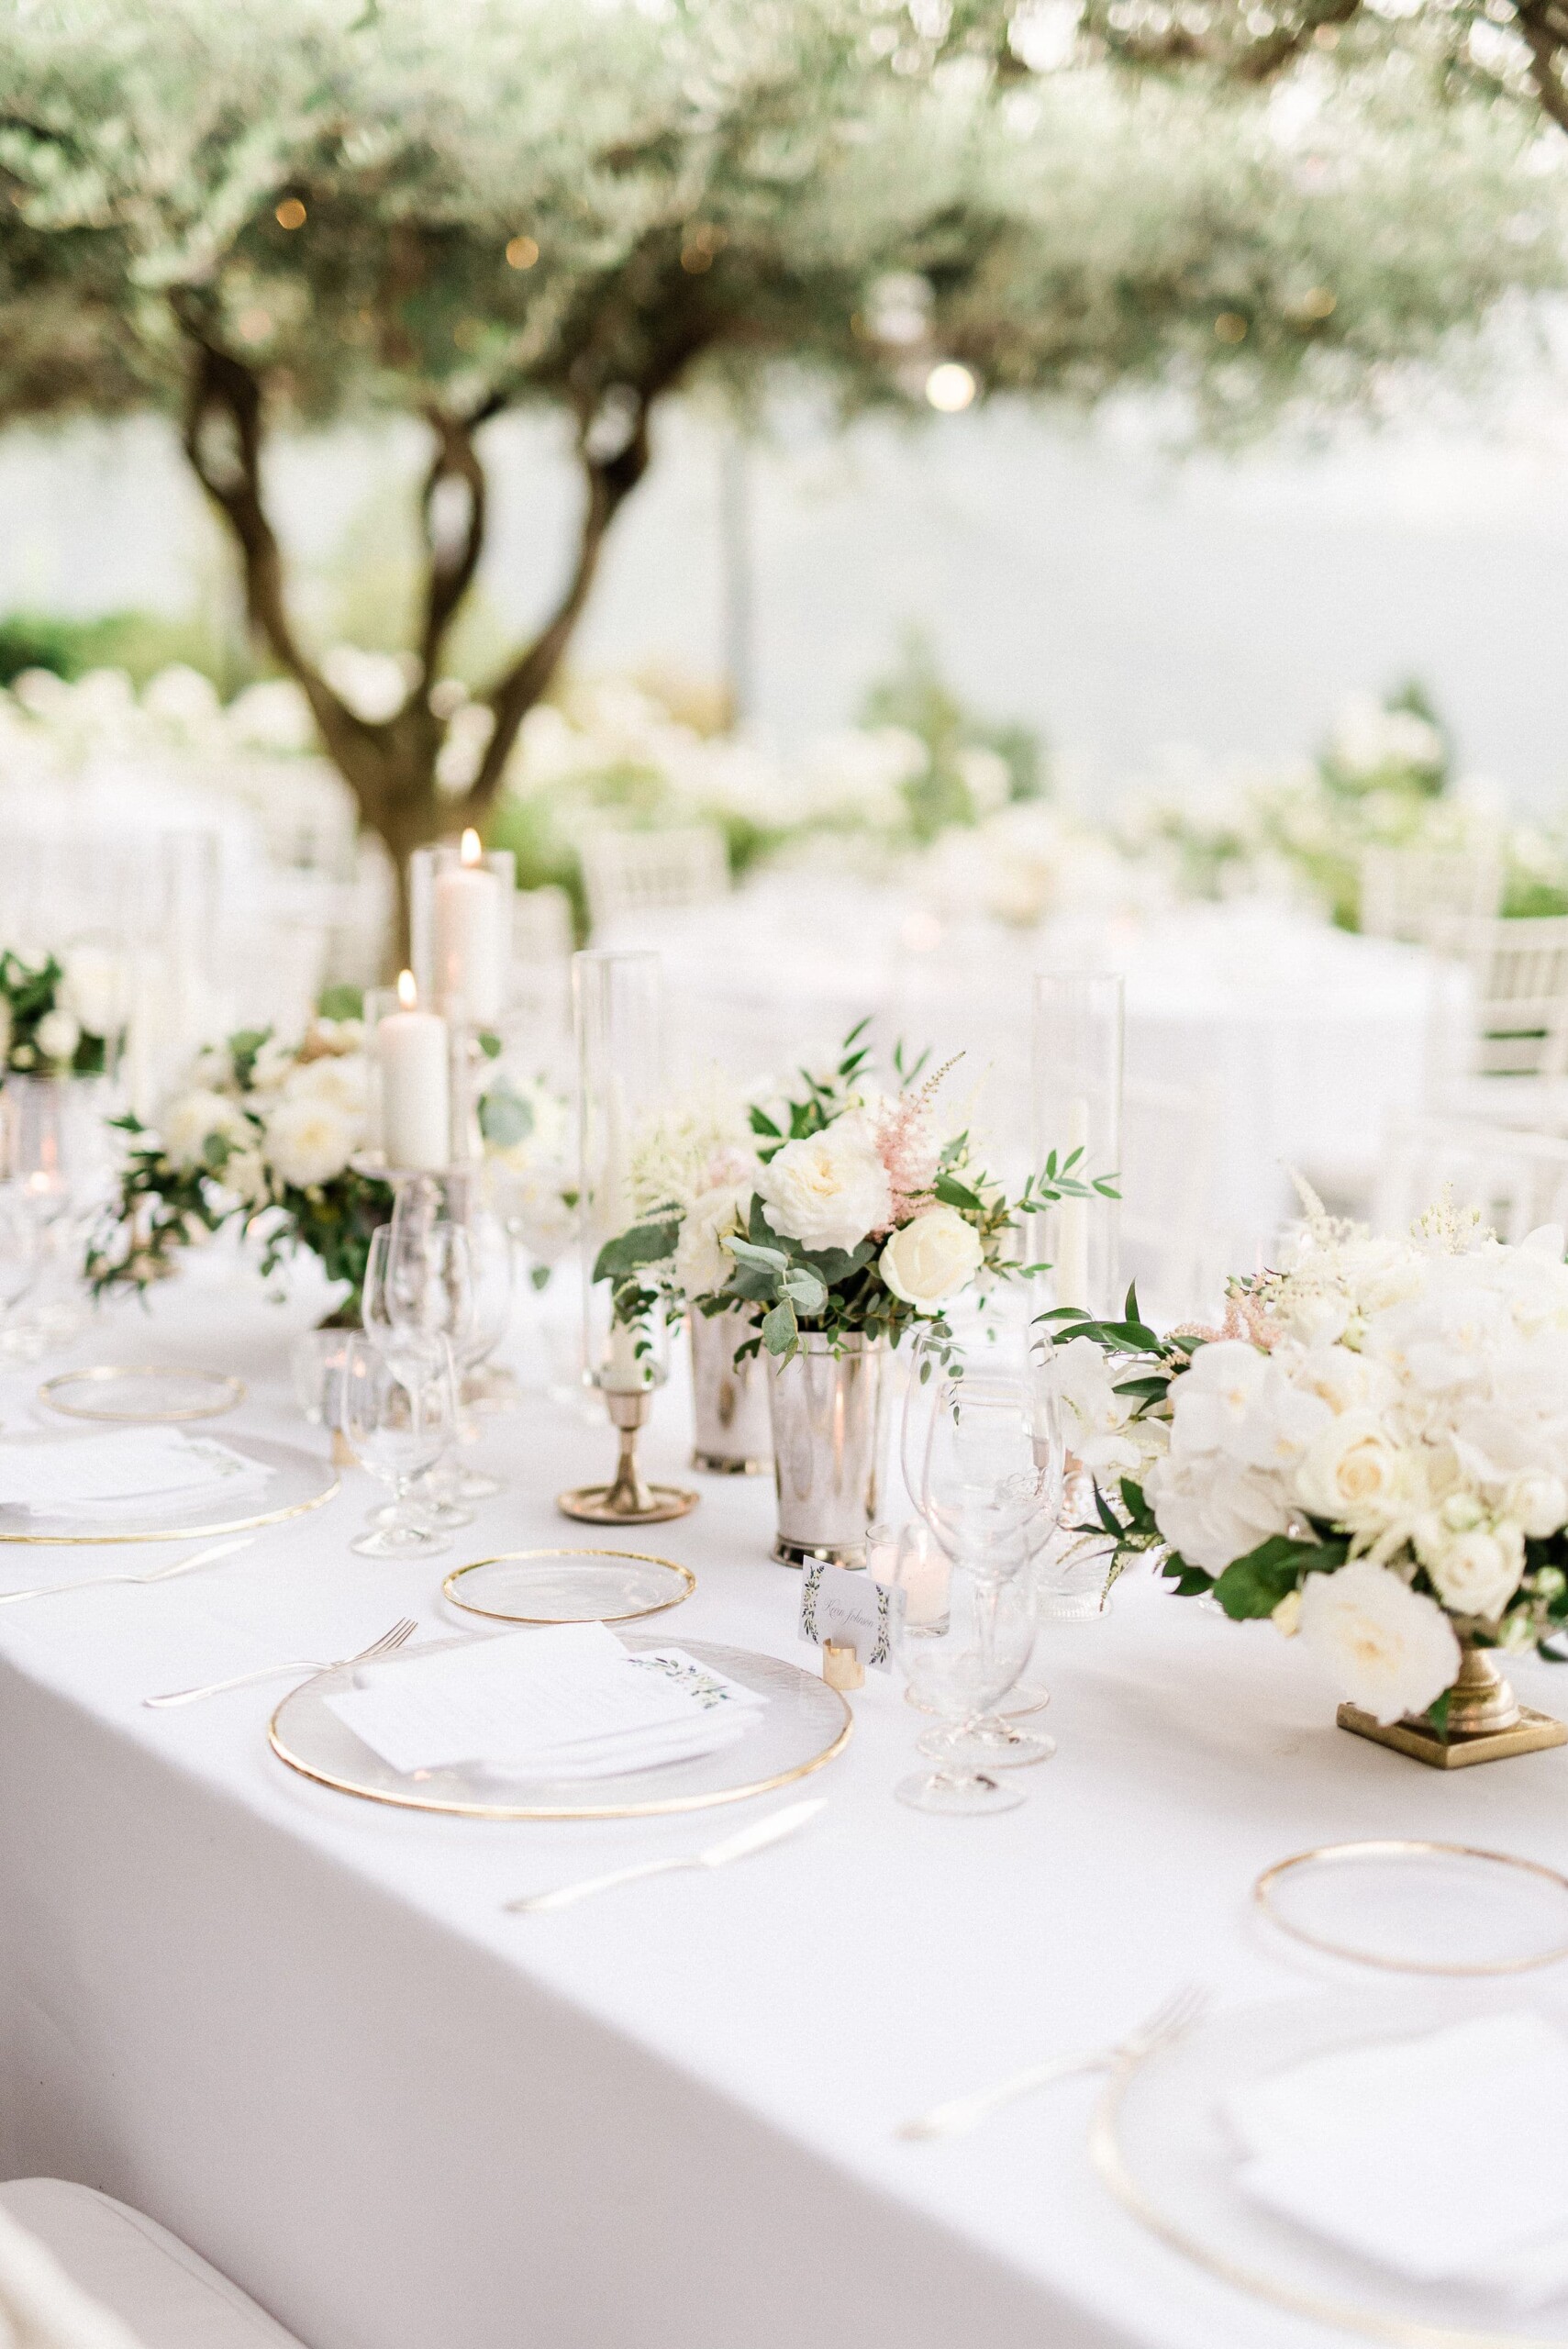 Wedding dinner table decored with white flowers